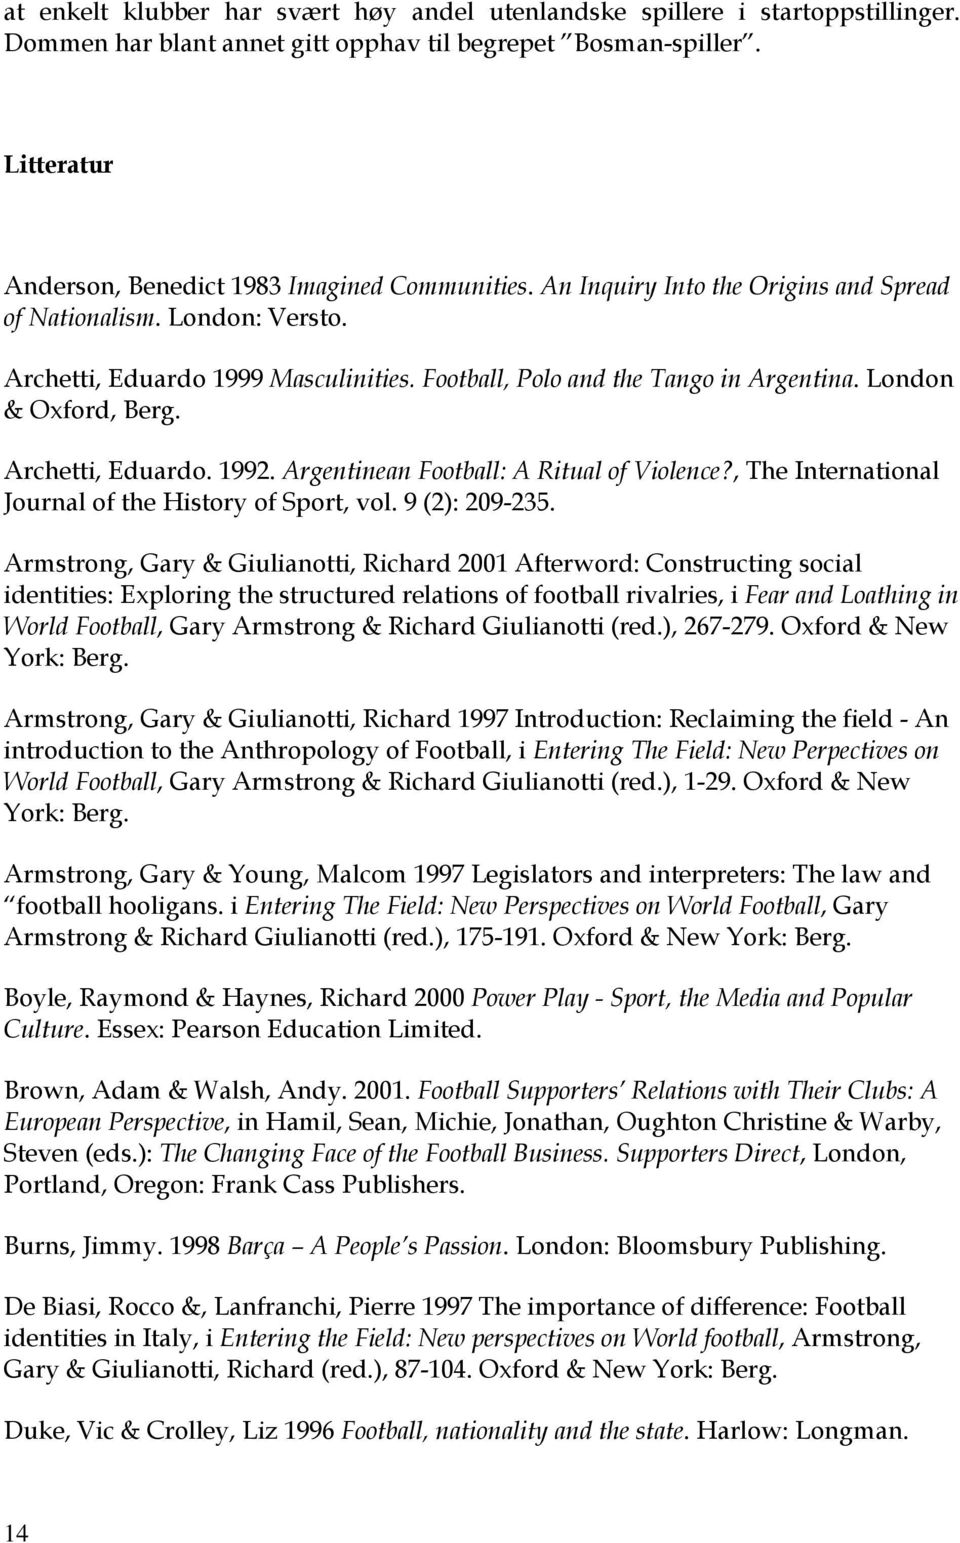 Football, Polo and the Tango in Argentina. London & Oxford, Berg. Archetti, Eduardo. 1992. Argentinean Football: A Ritual of Violence?, The International Journal of the History of Sport, vol.